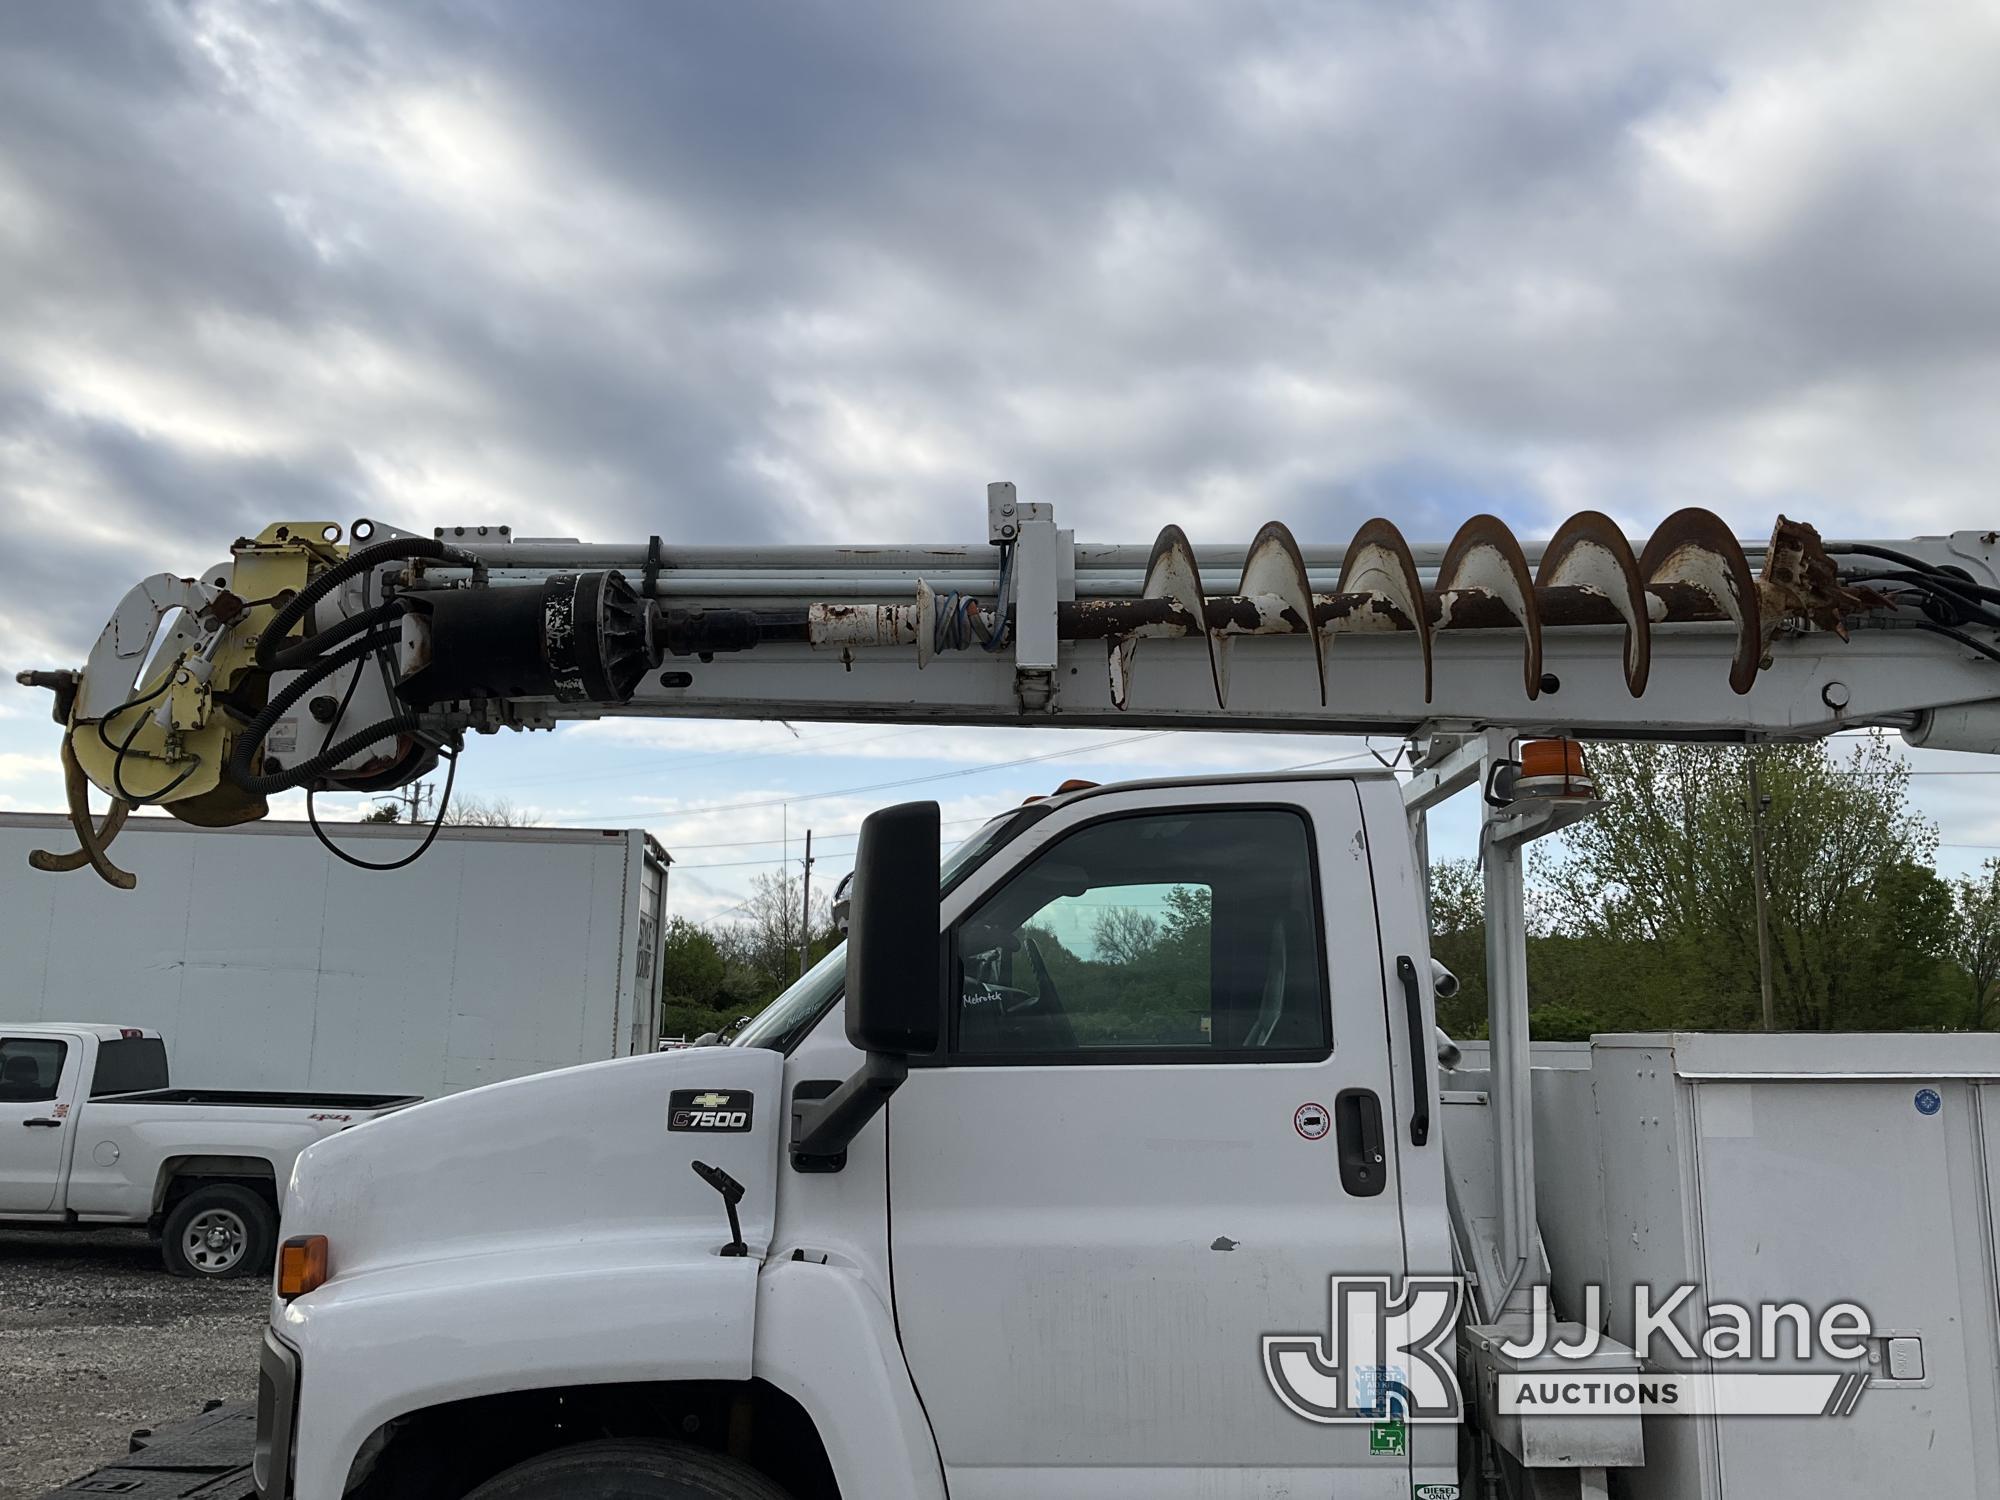 (Plymouth Meeting, PA) Altec DM47-BR, Digger Derrick rear mounted on 2006 Chevrolet C7500 Utility Tr